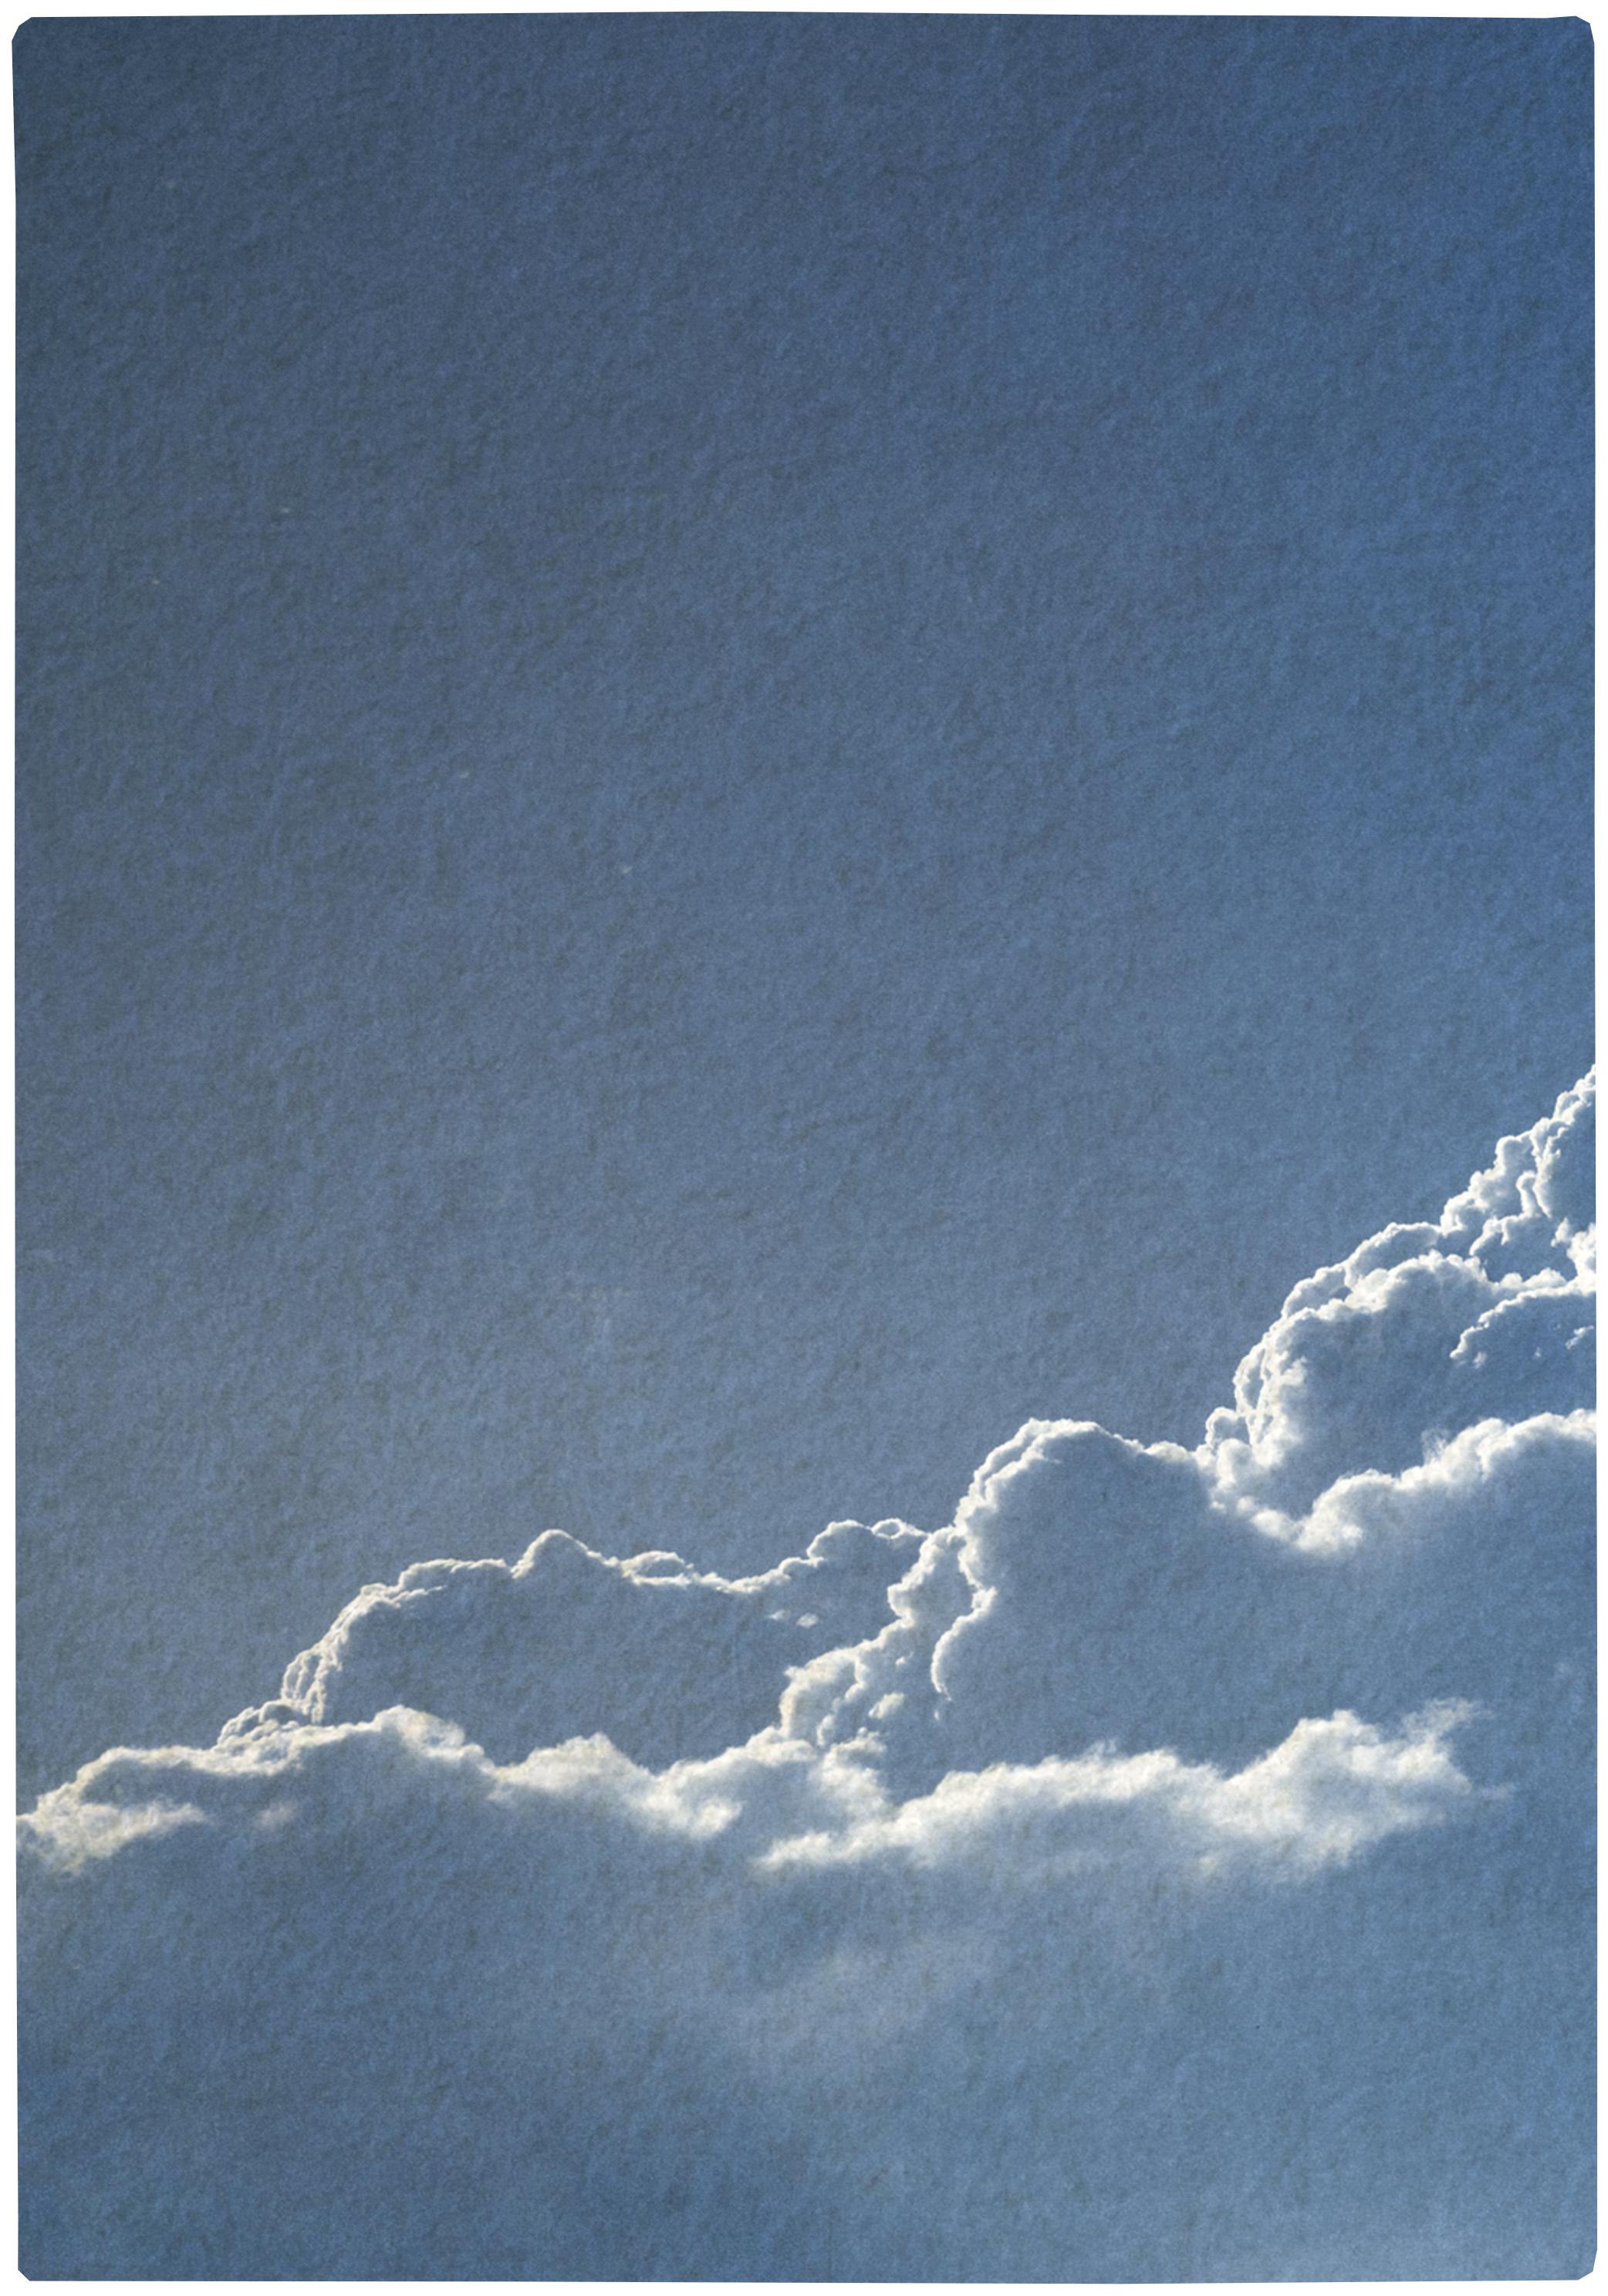 Blue Tones Triptych of Serene Cloudy Sky, Handmade Cyanotype Print on Paper 2021 - Baroque Painting by Kind of Cyan